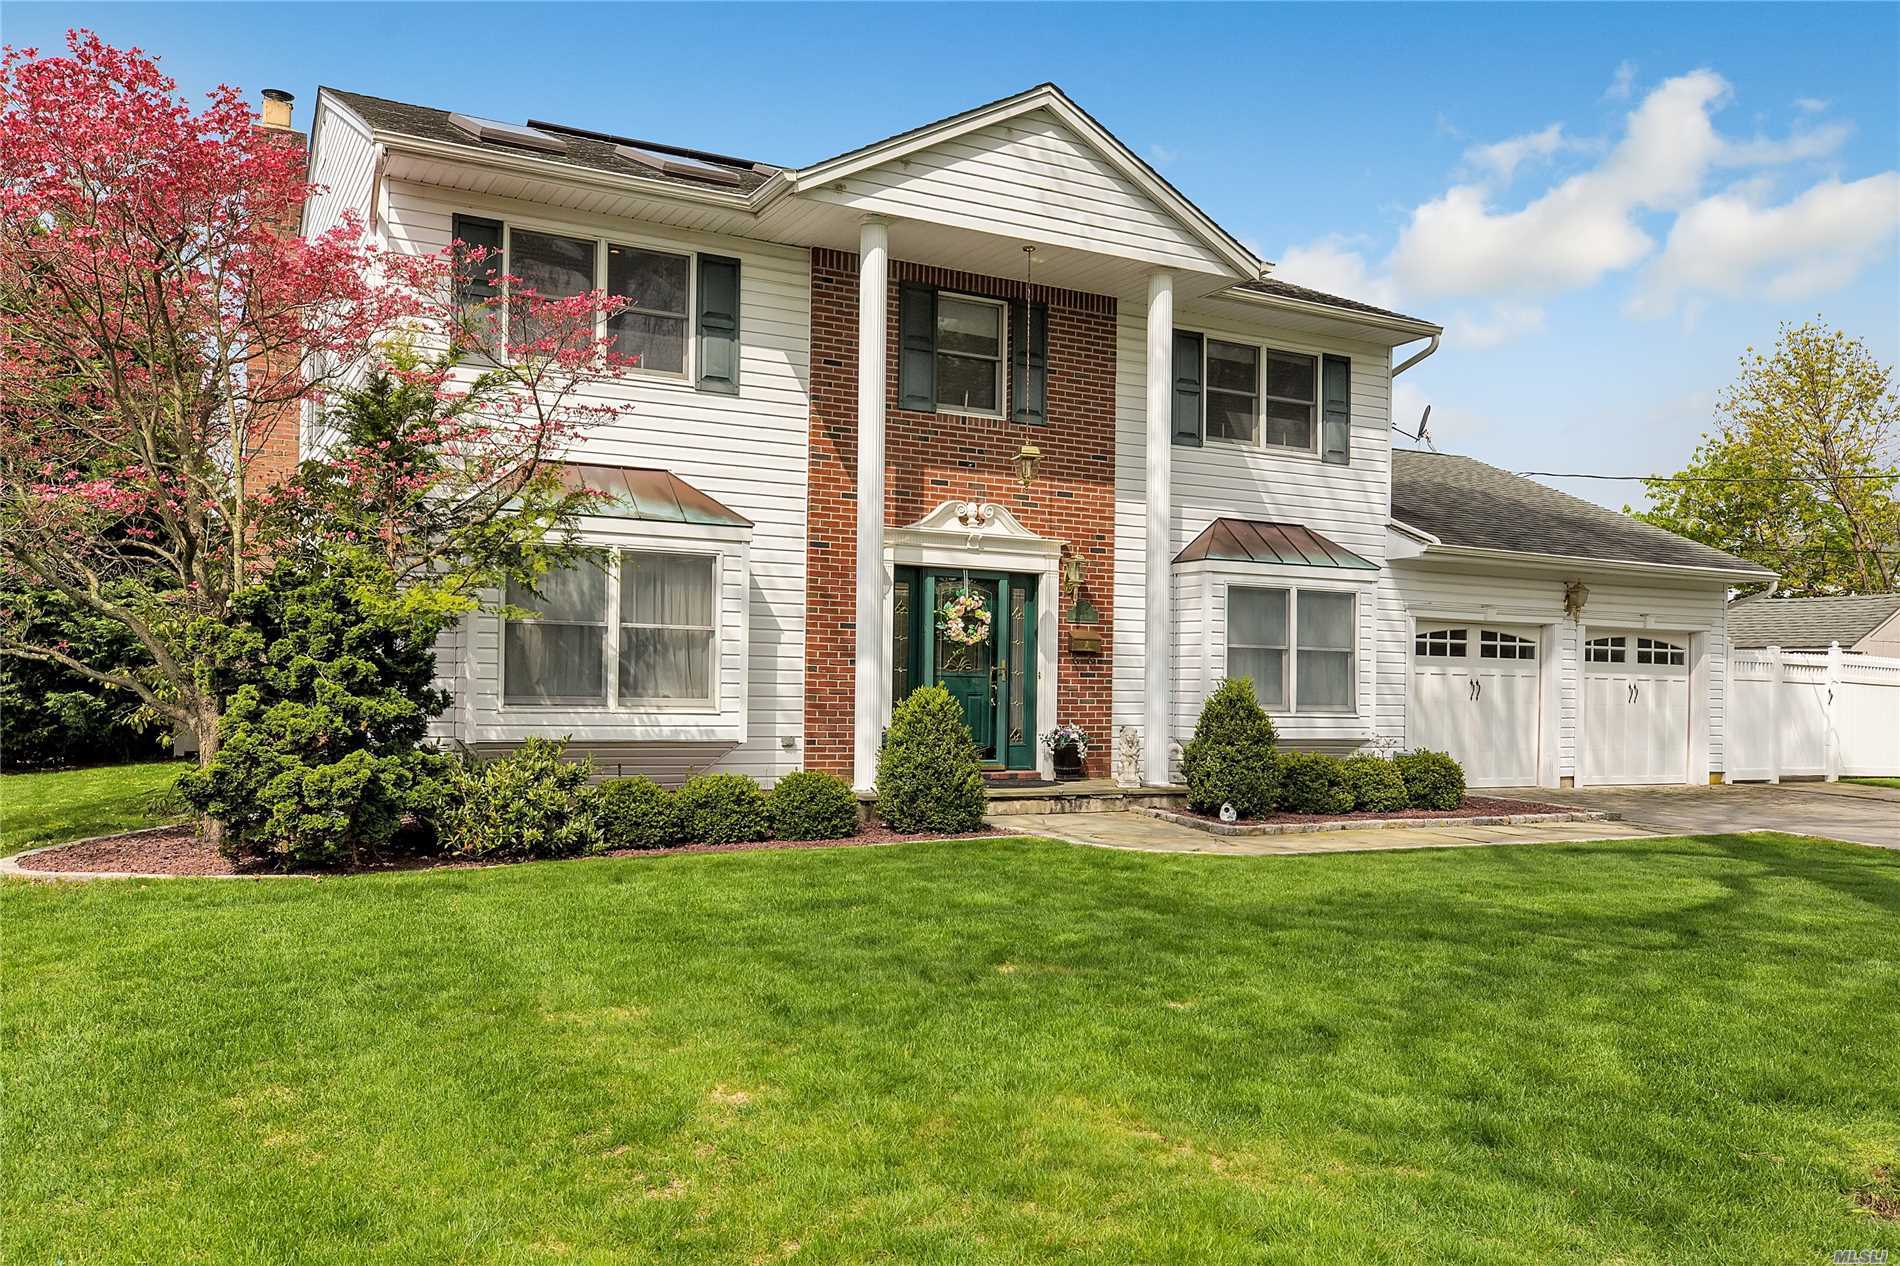 LOCATION! This is the Family Home You Have Been Waiting For! Immaculate Center Hall Colonial on Quiet Cul De Sac in the Heart of Babylon Village. Private Setting For This 3200 sq. ft. Home Which Boasts 4/5 BR&rsquo;s, 2.5 Baths, FLR w/ Bay Window and Built Ins, Expansive FDR w/Bay Window, HW Floors & Mud Room. Sun Lit Updated Custom Cherry Kitchen w/ Hi-End SS App & Gran, Opens Up to Den w/ FP. IG Gunite Heated Pool and Lge Jacuzzi! 2.5 Car Gar. Owned Solar Panels, Paver Driveway & Plenty of Storage.